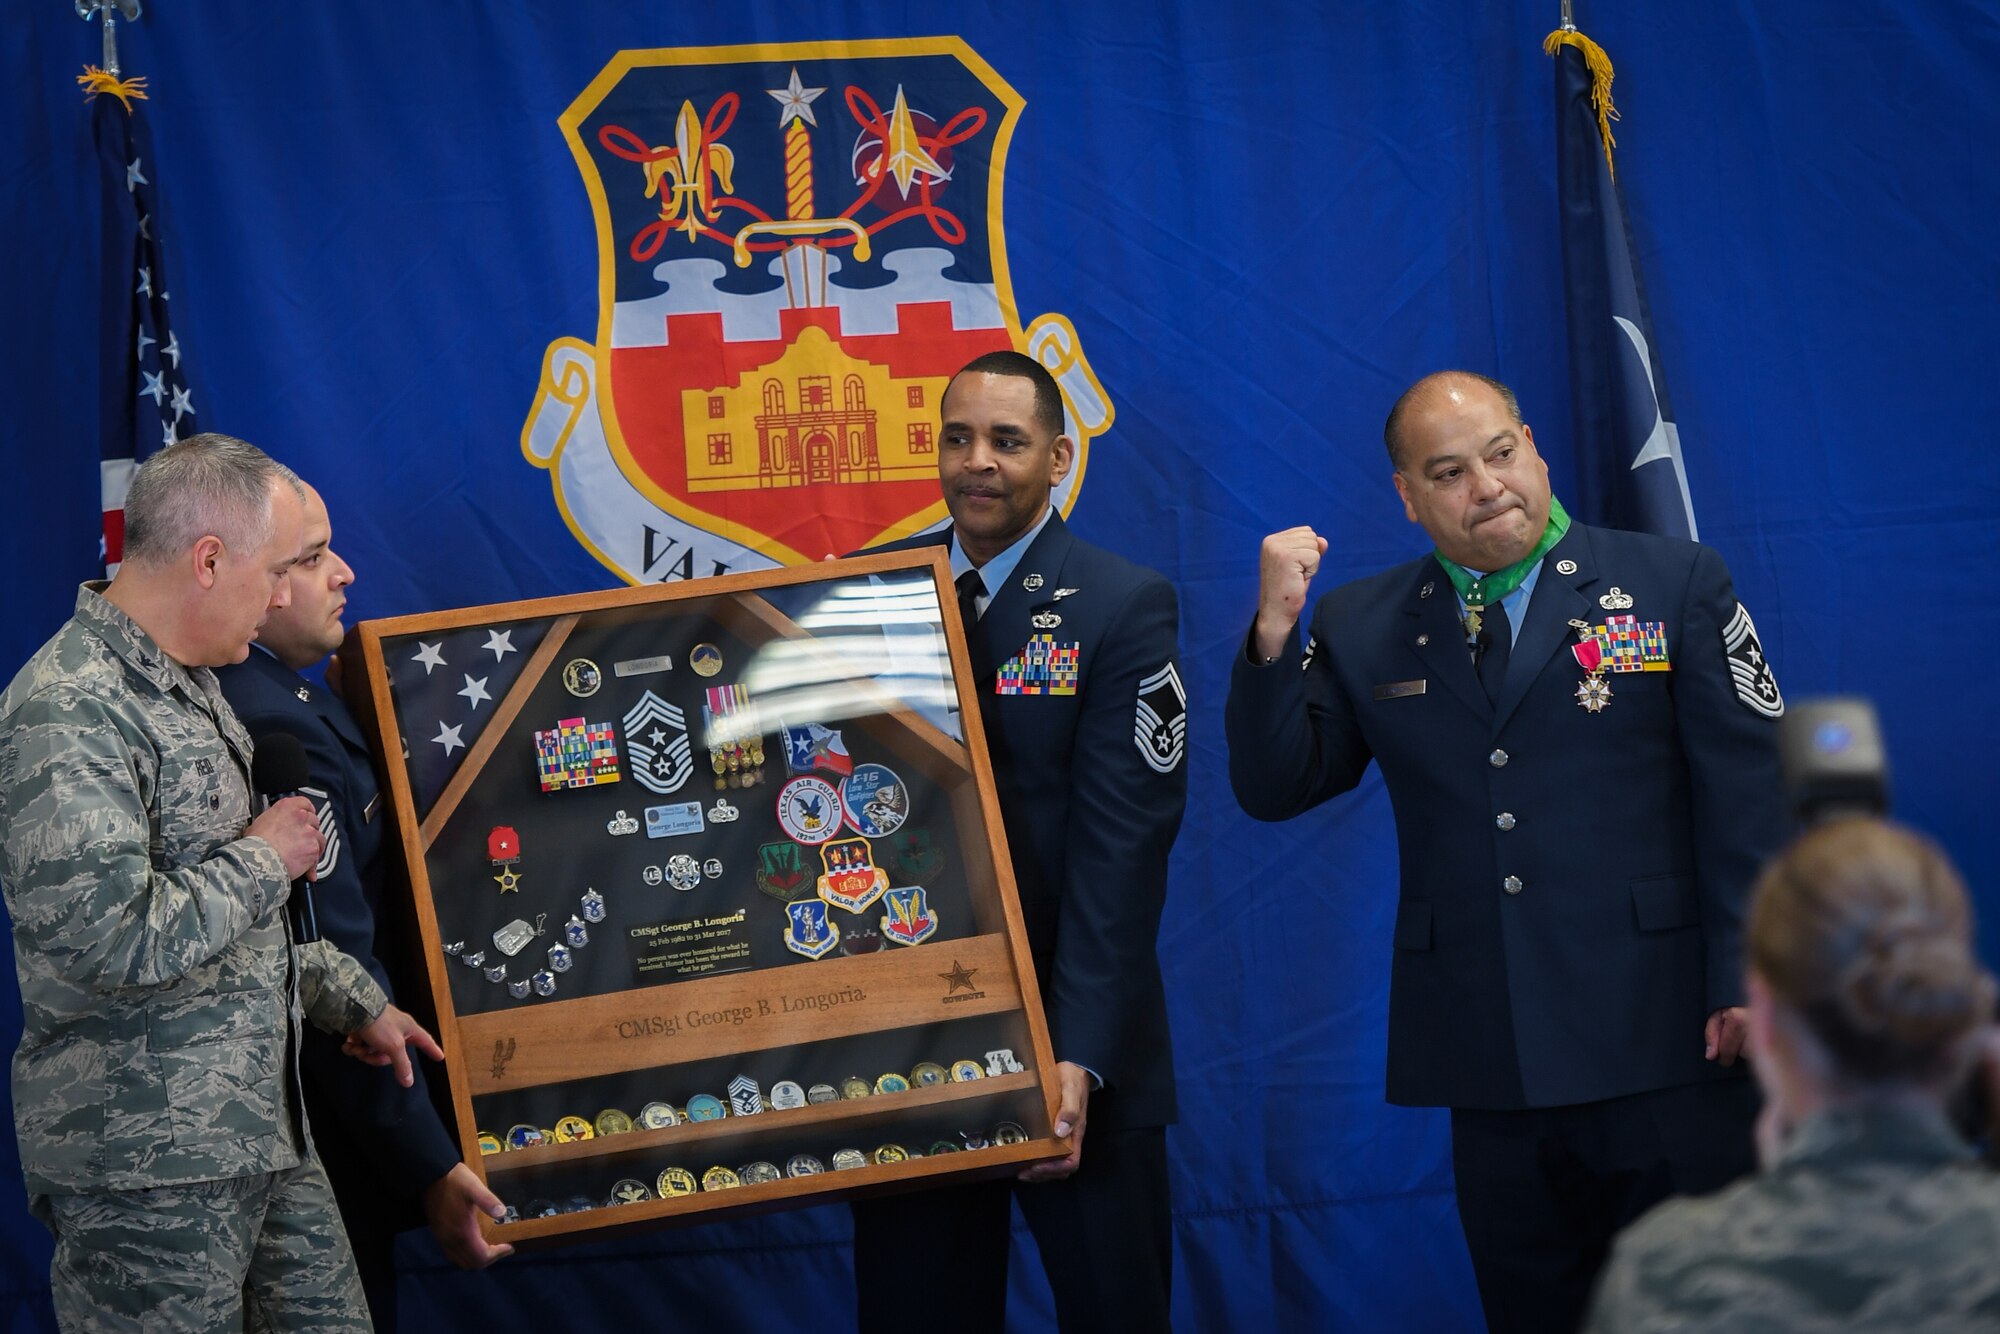 Command Chief Master Sgt. George Longoria (right) is presented a shadow box honoring his 35 years of military service by Col. Michael Reid (left), vice wing commander, Master Sgt. Albert Cardenas (second from left) and Senior Master Sgt. Marvin Williams (second from right), during his retirement ceremony at Joint Base San Antonio-Lackland, Texas, Feb. 25, 2017. Longoria retires after 35 years of service with the 149th Fighter Wing, Texas Air National Guard. (U.S. Air National Guard photo by Tech. Sgt. Eric L. Wilson)